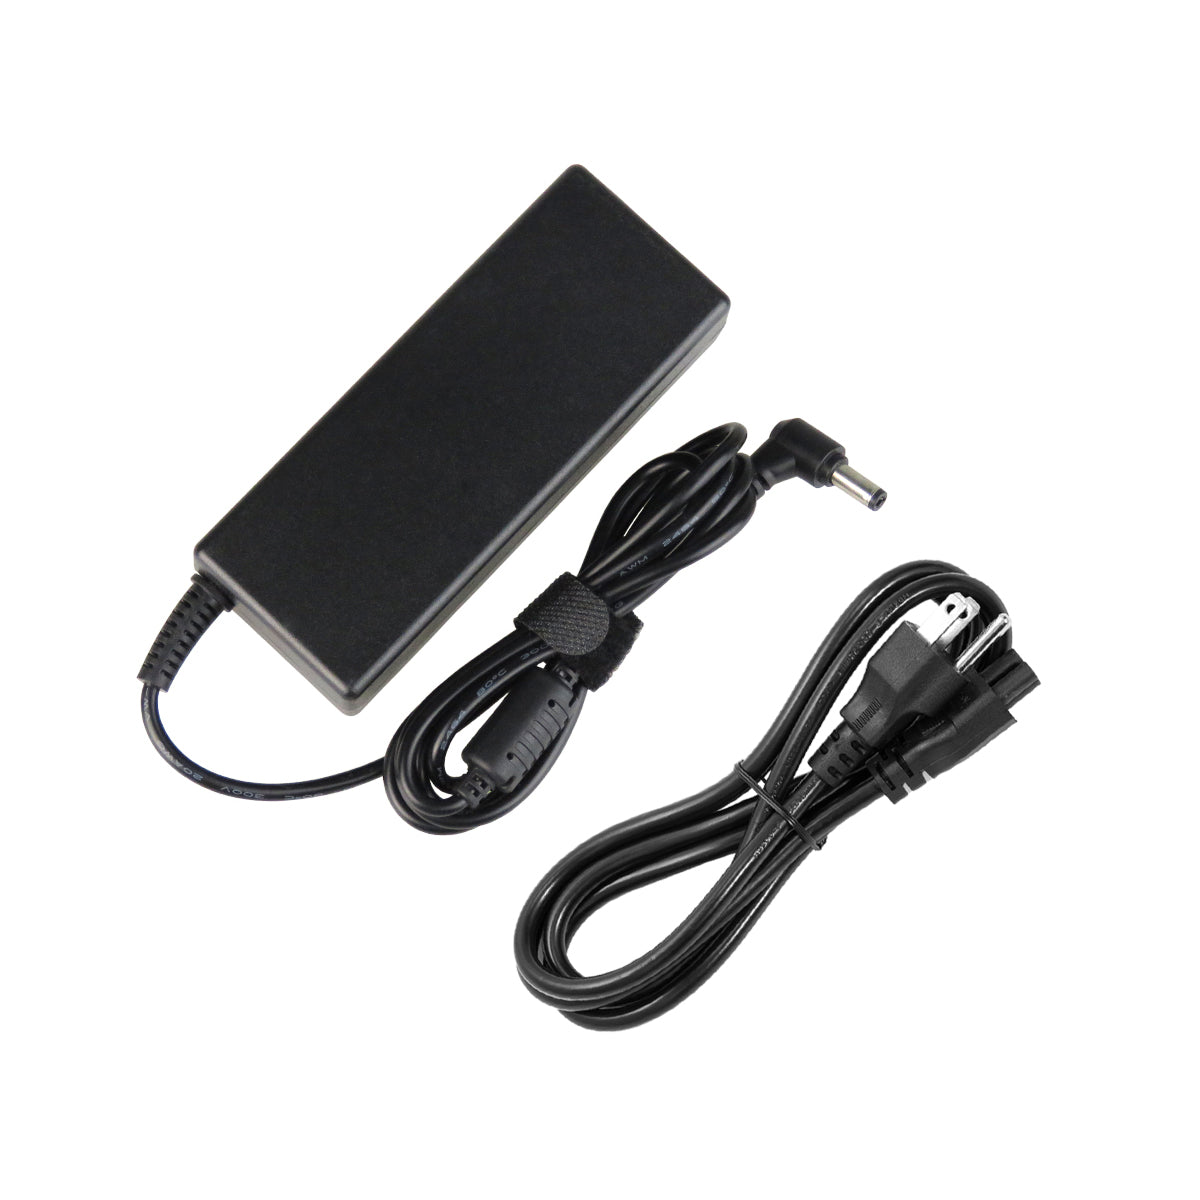 AC Adapter Charger for ASUS N43SM Notebook.